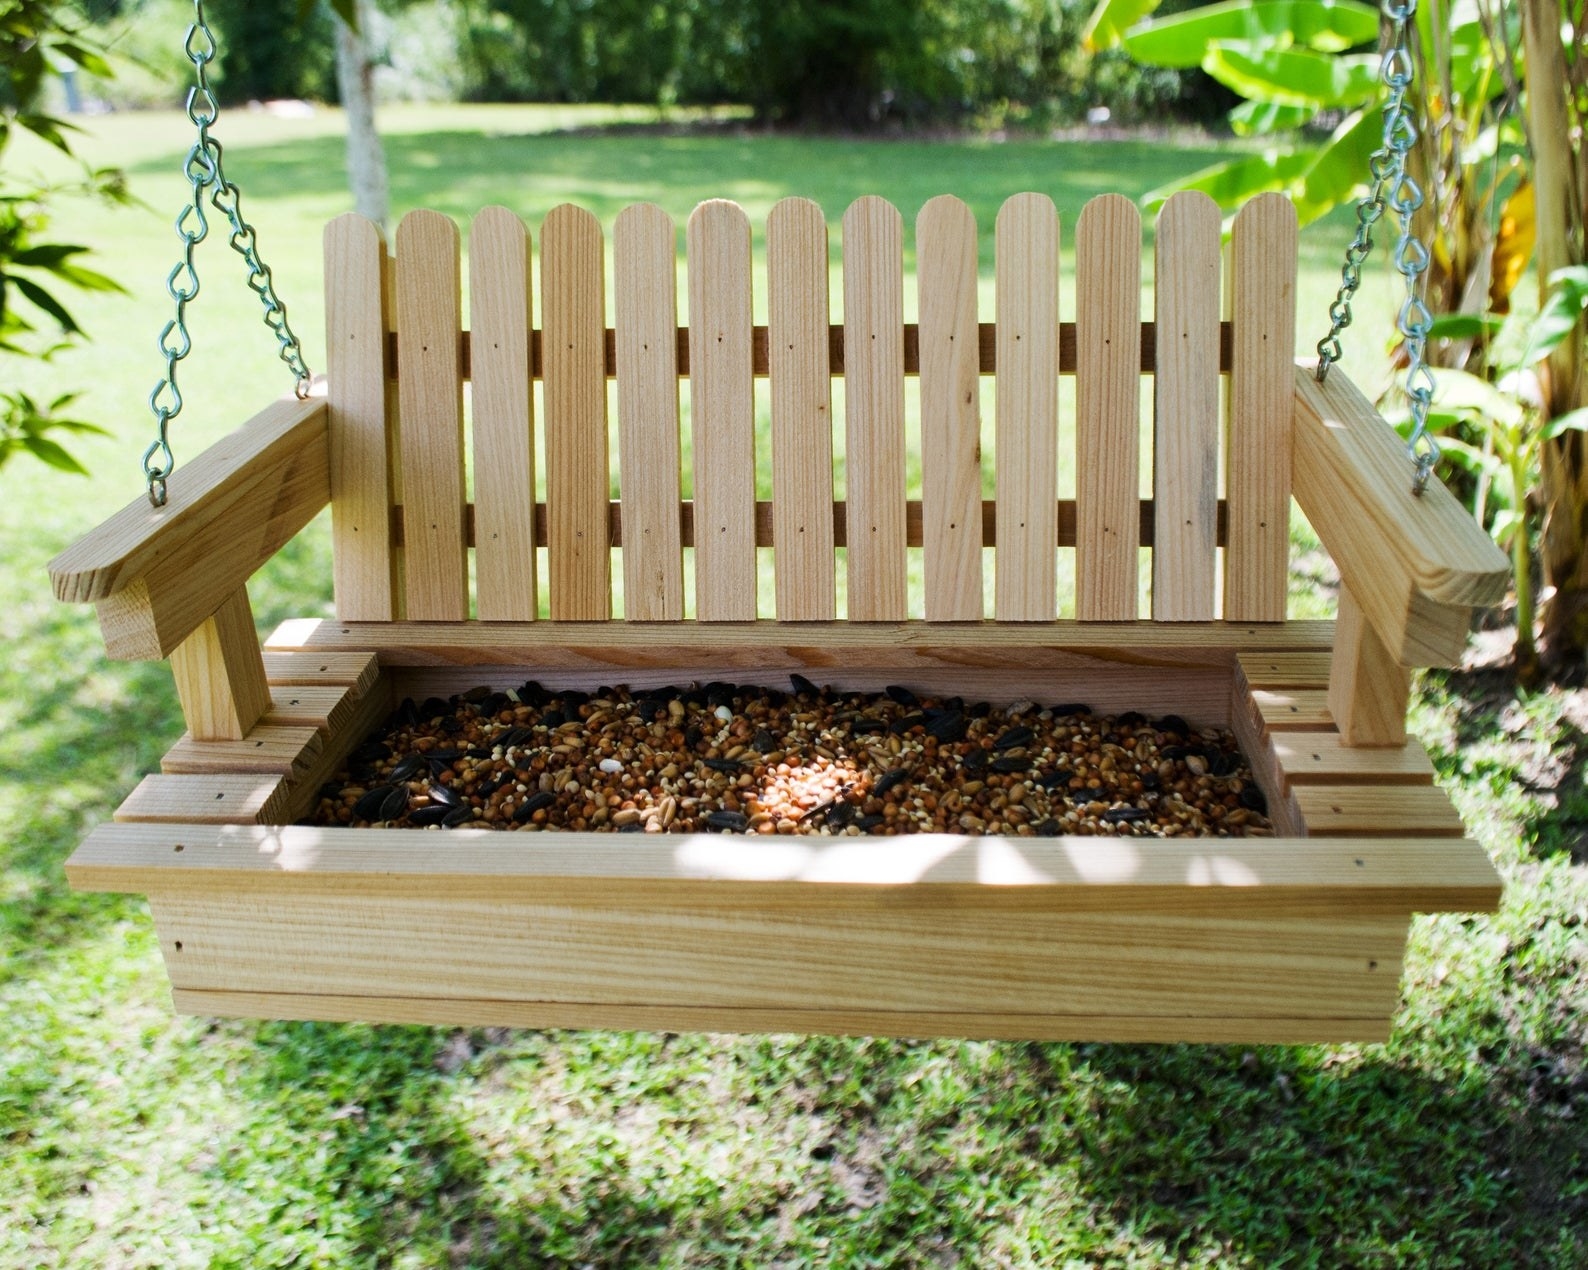 The wooden bench with bird food in the seat